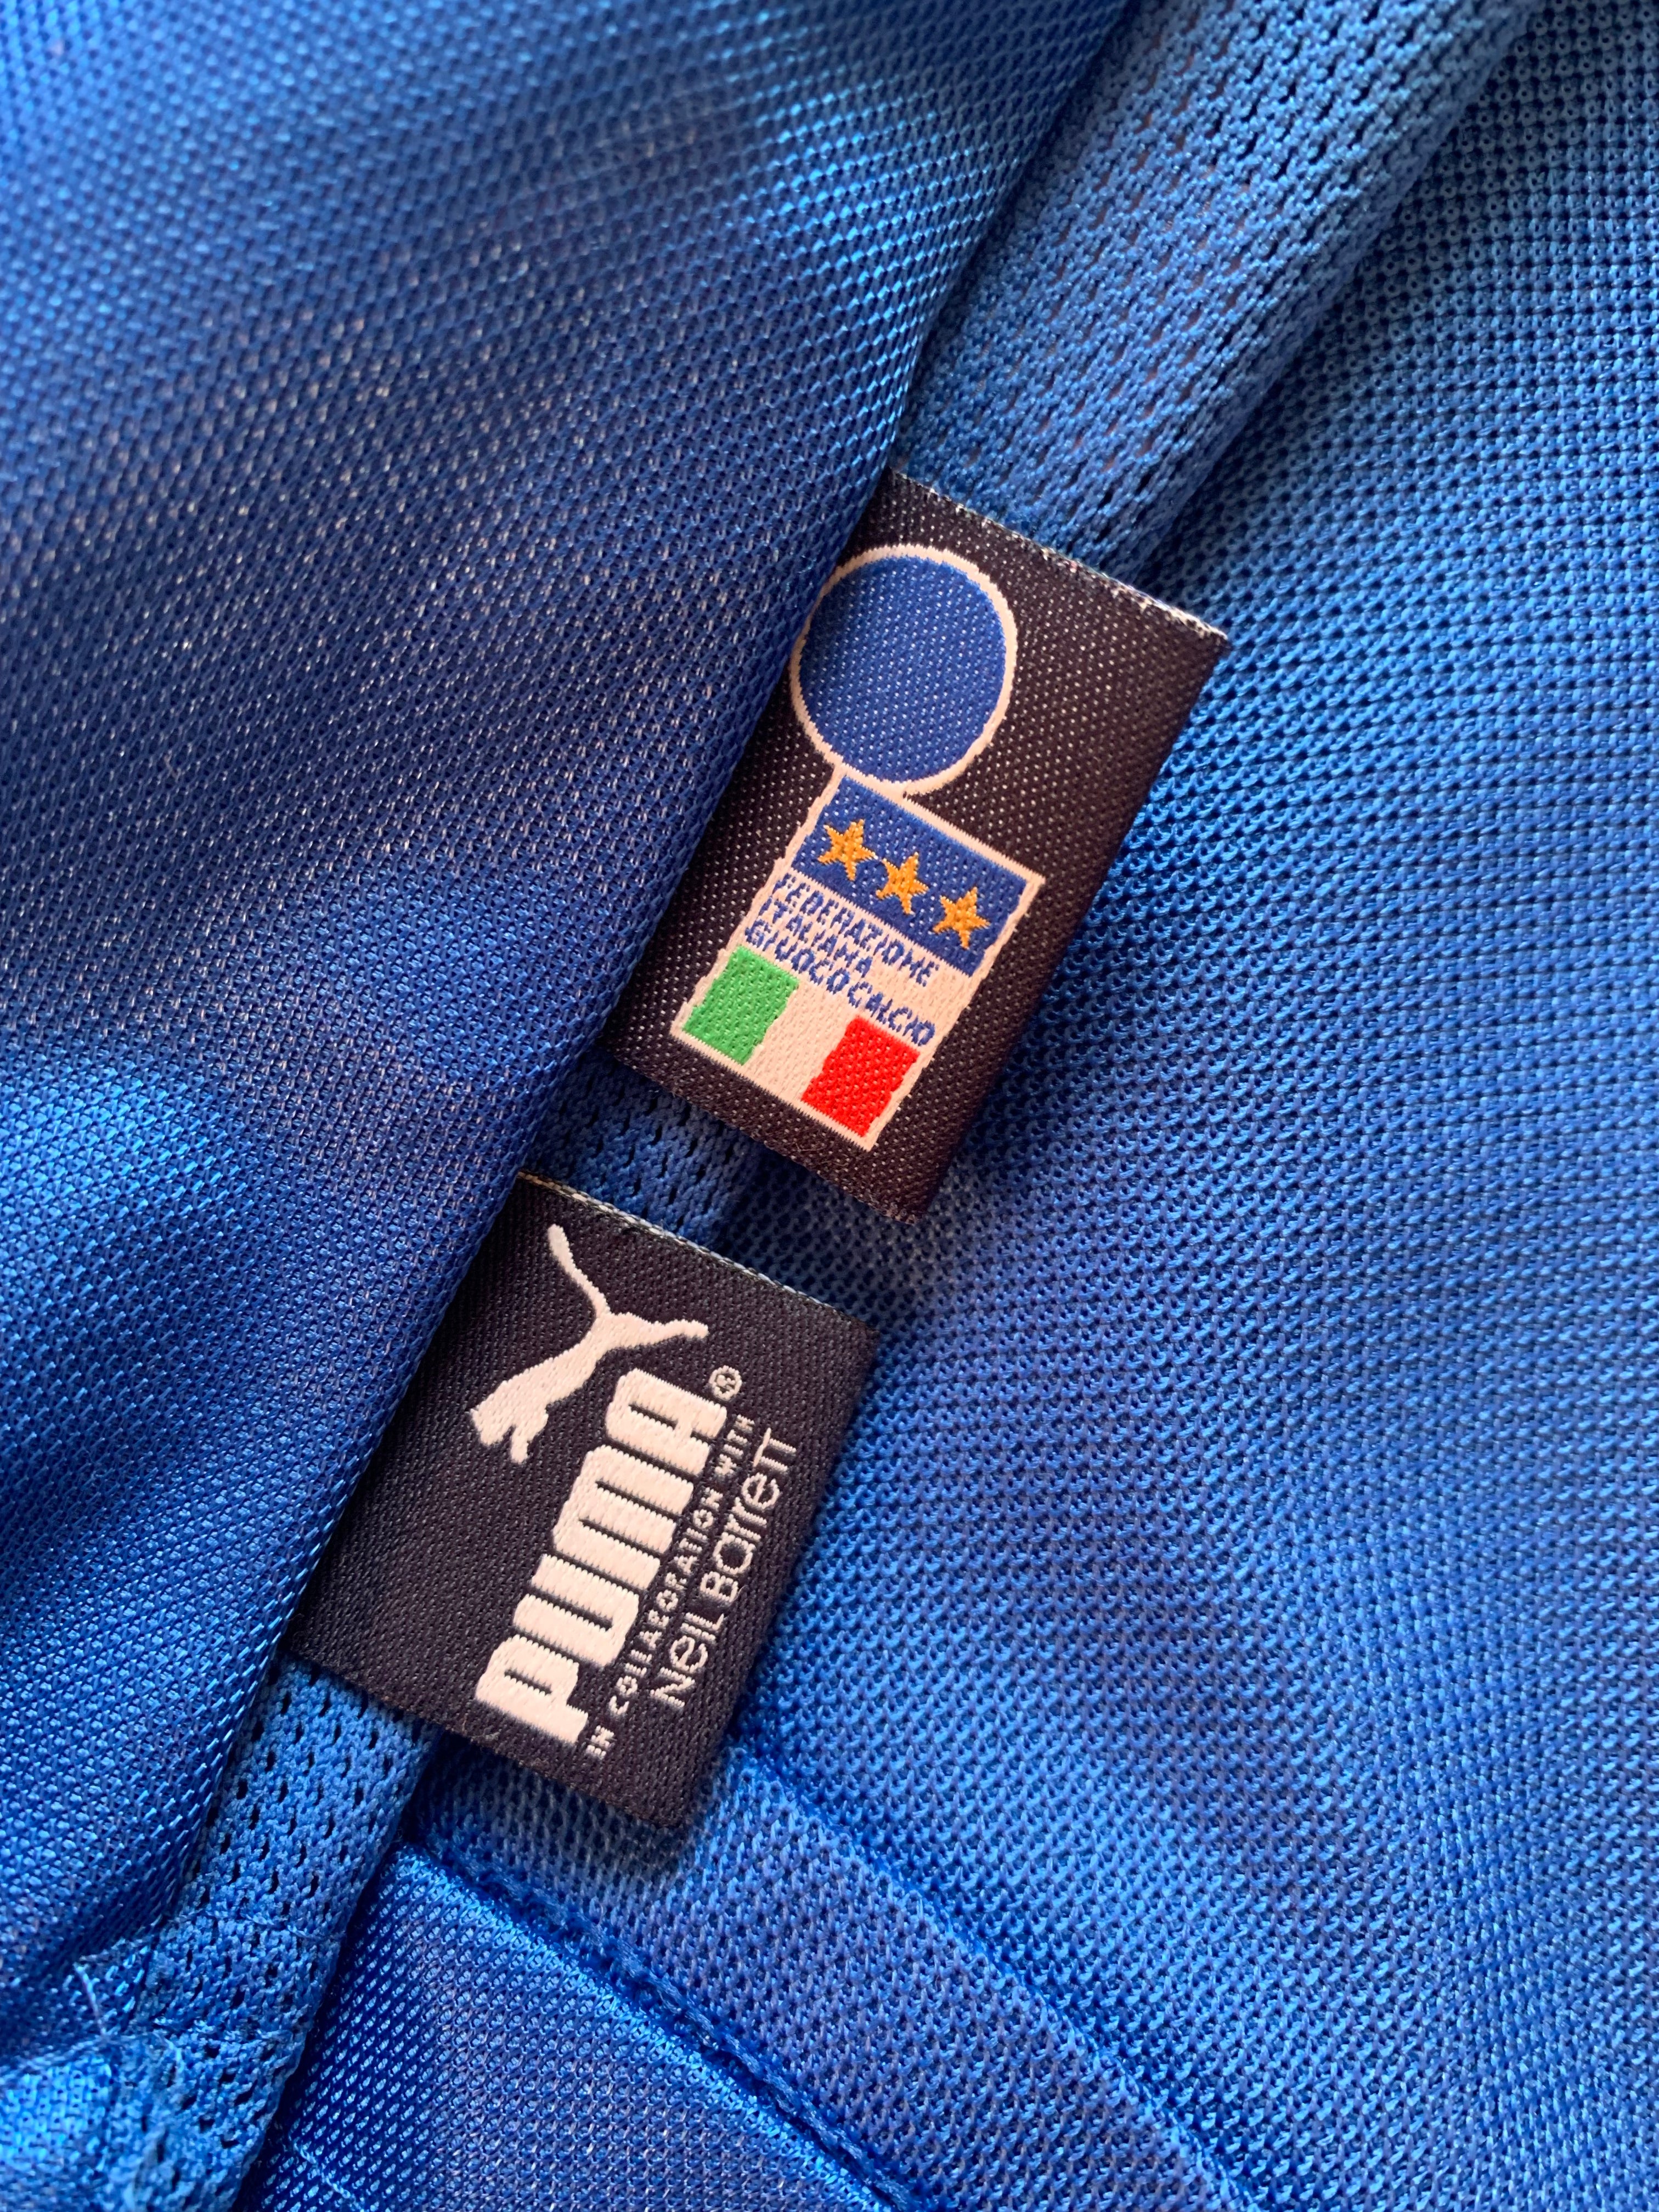 2004/06 Italy Home Shirt (L) 8/10